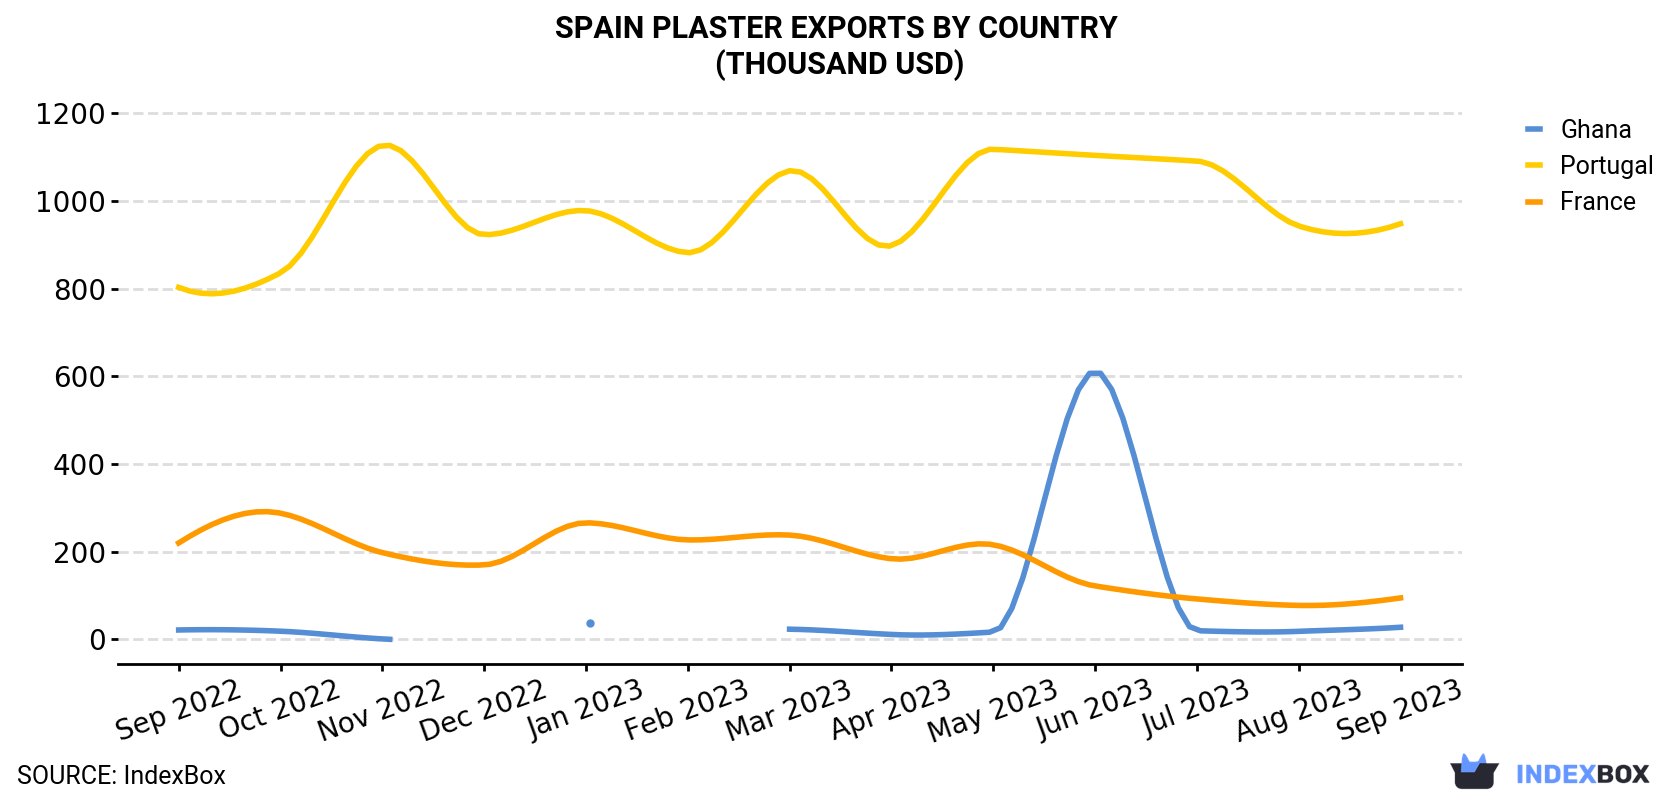 Spain Plaster Exports By Country (Thousand USD)